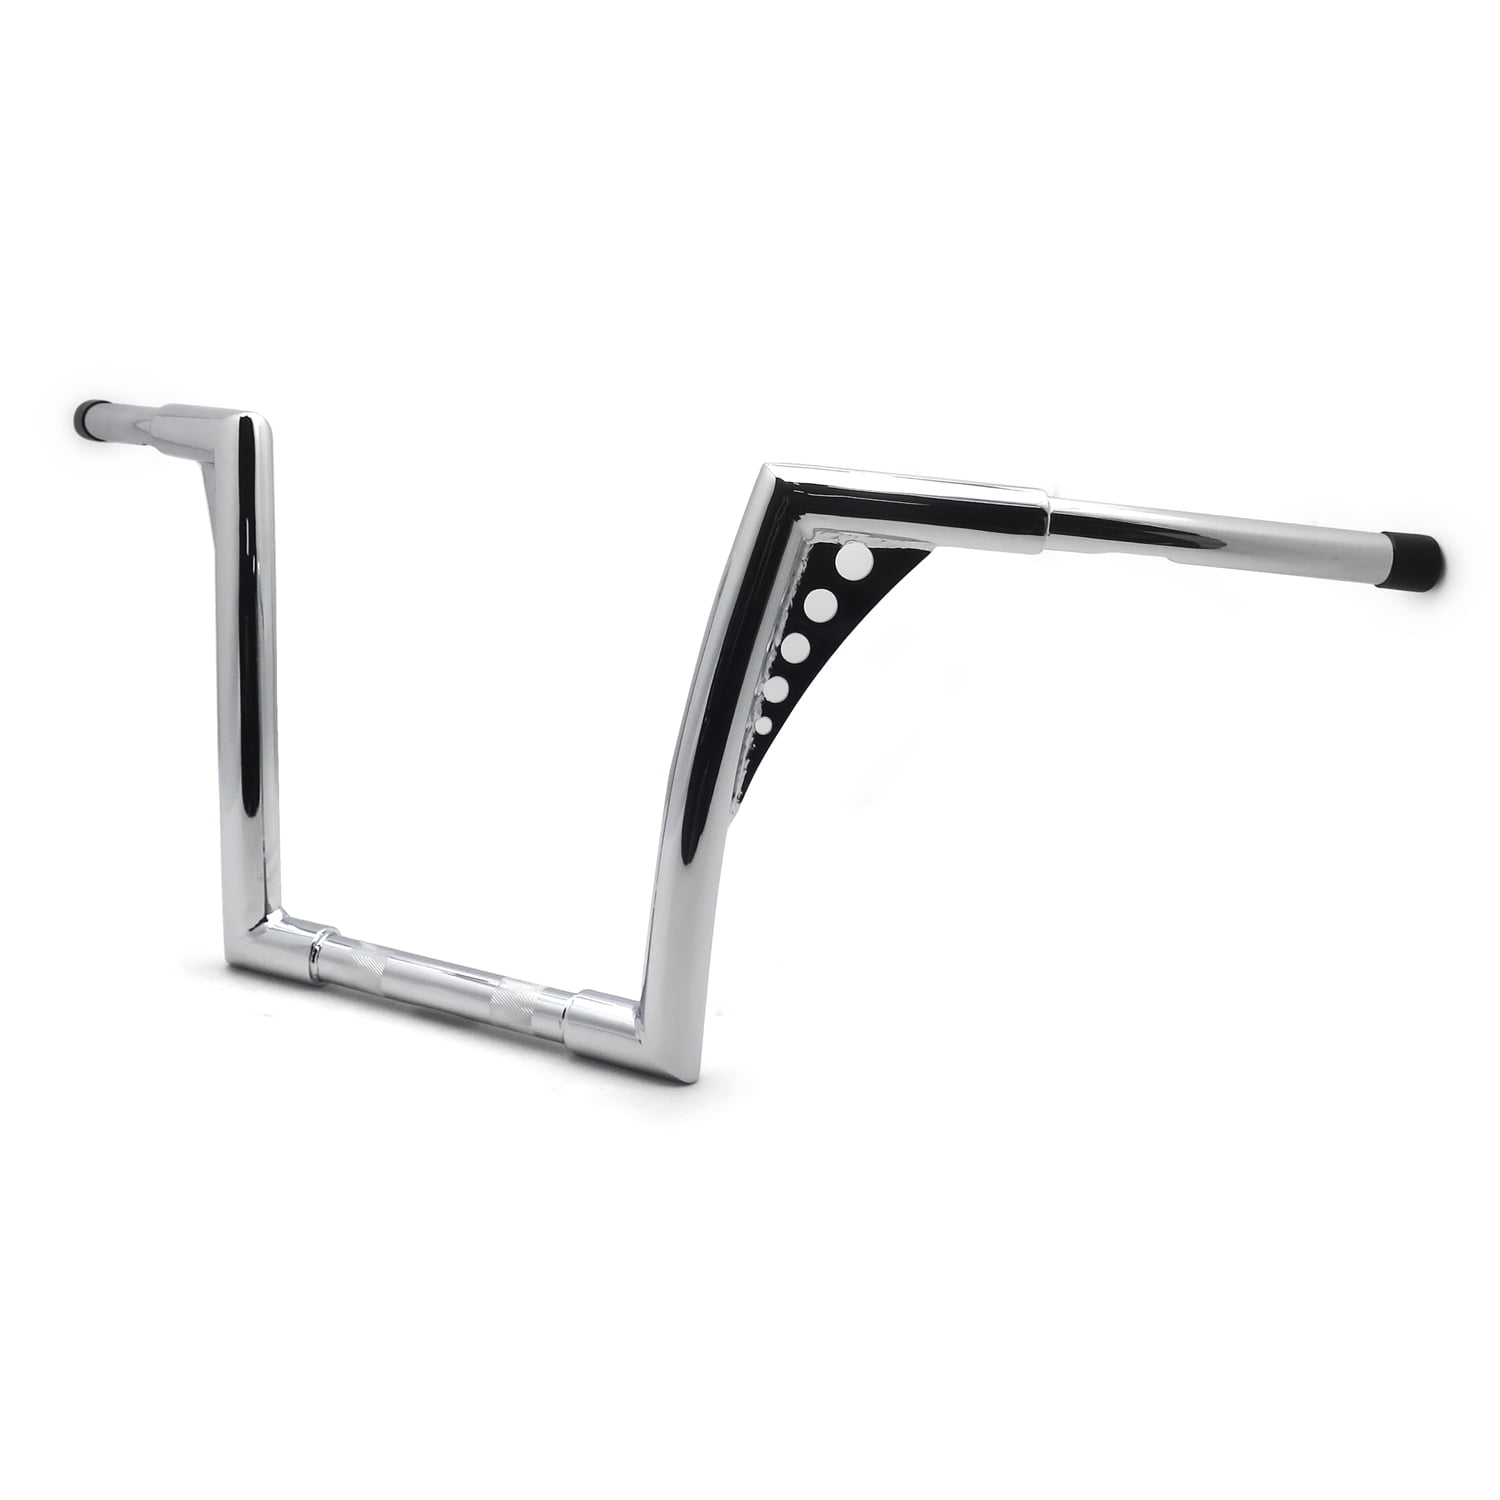 P/N: US-TGHD-HB002-II Ape Hangers Bars Fat 1-1/4 14 Rise Handlebars Compatible with Harley Softail Sportster XL HTTMT 